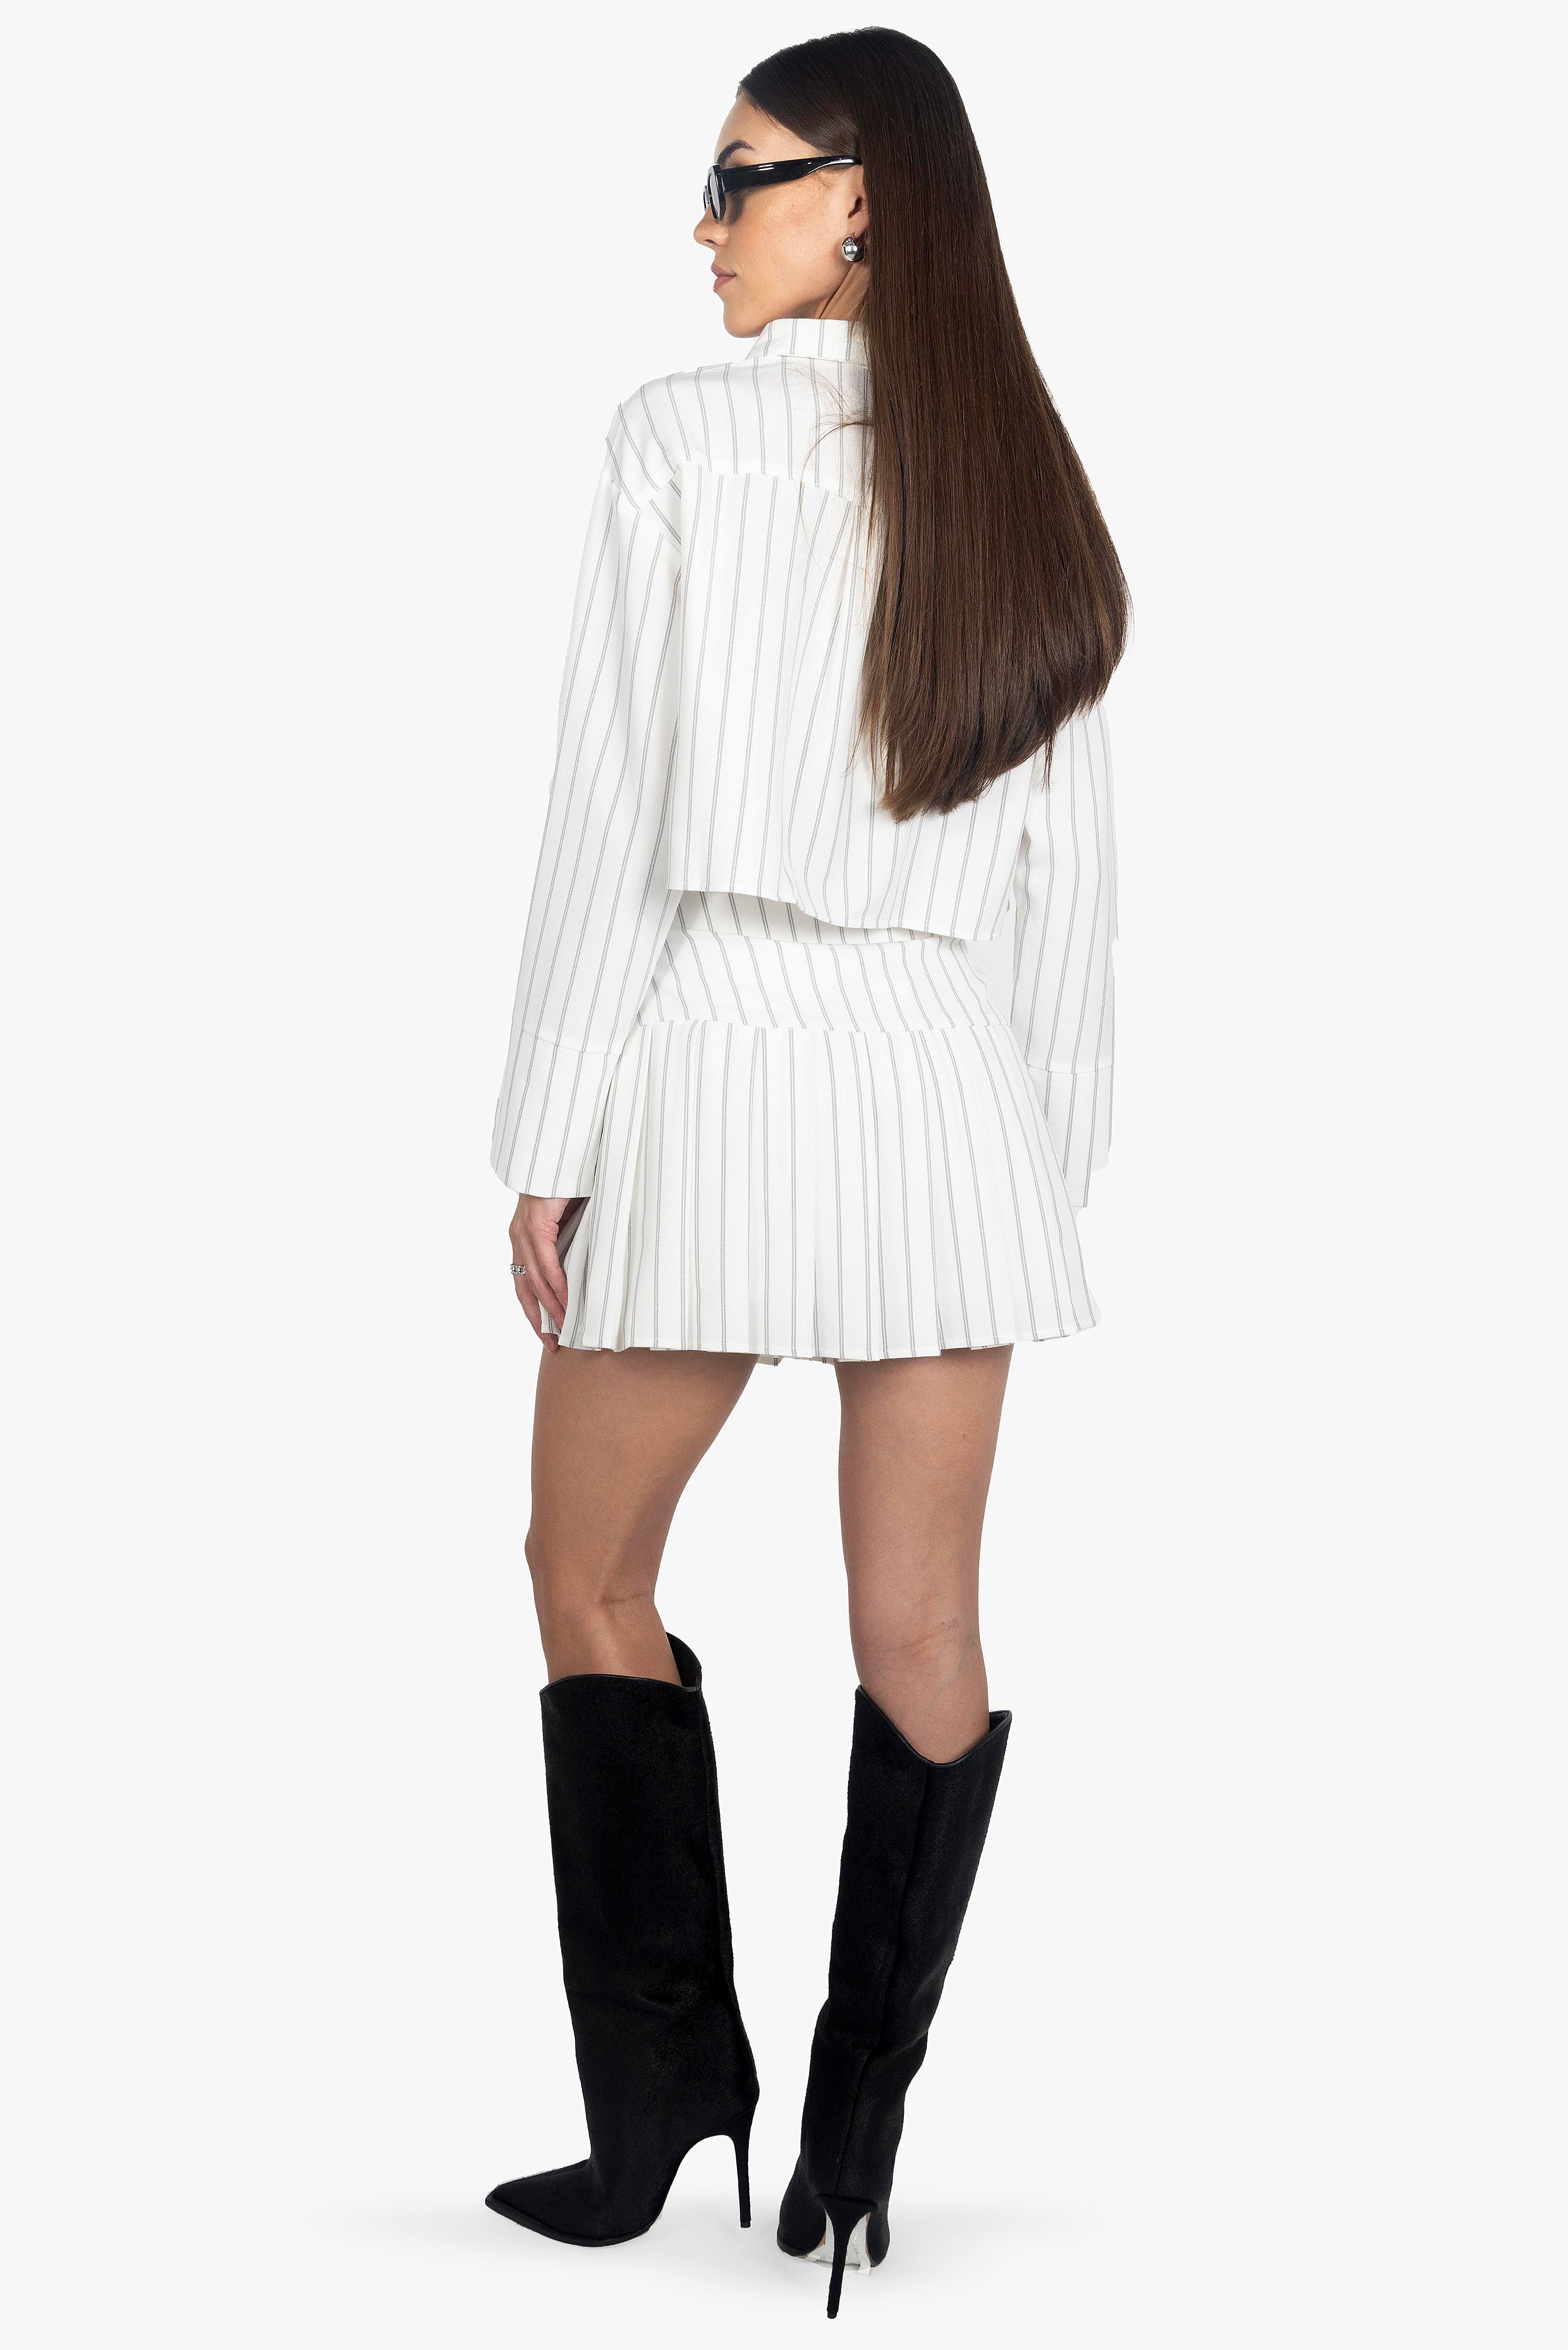 WHITE STRIPED PLEATED SKIRT